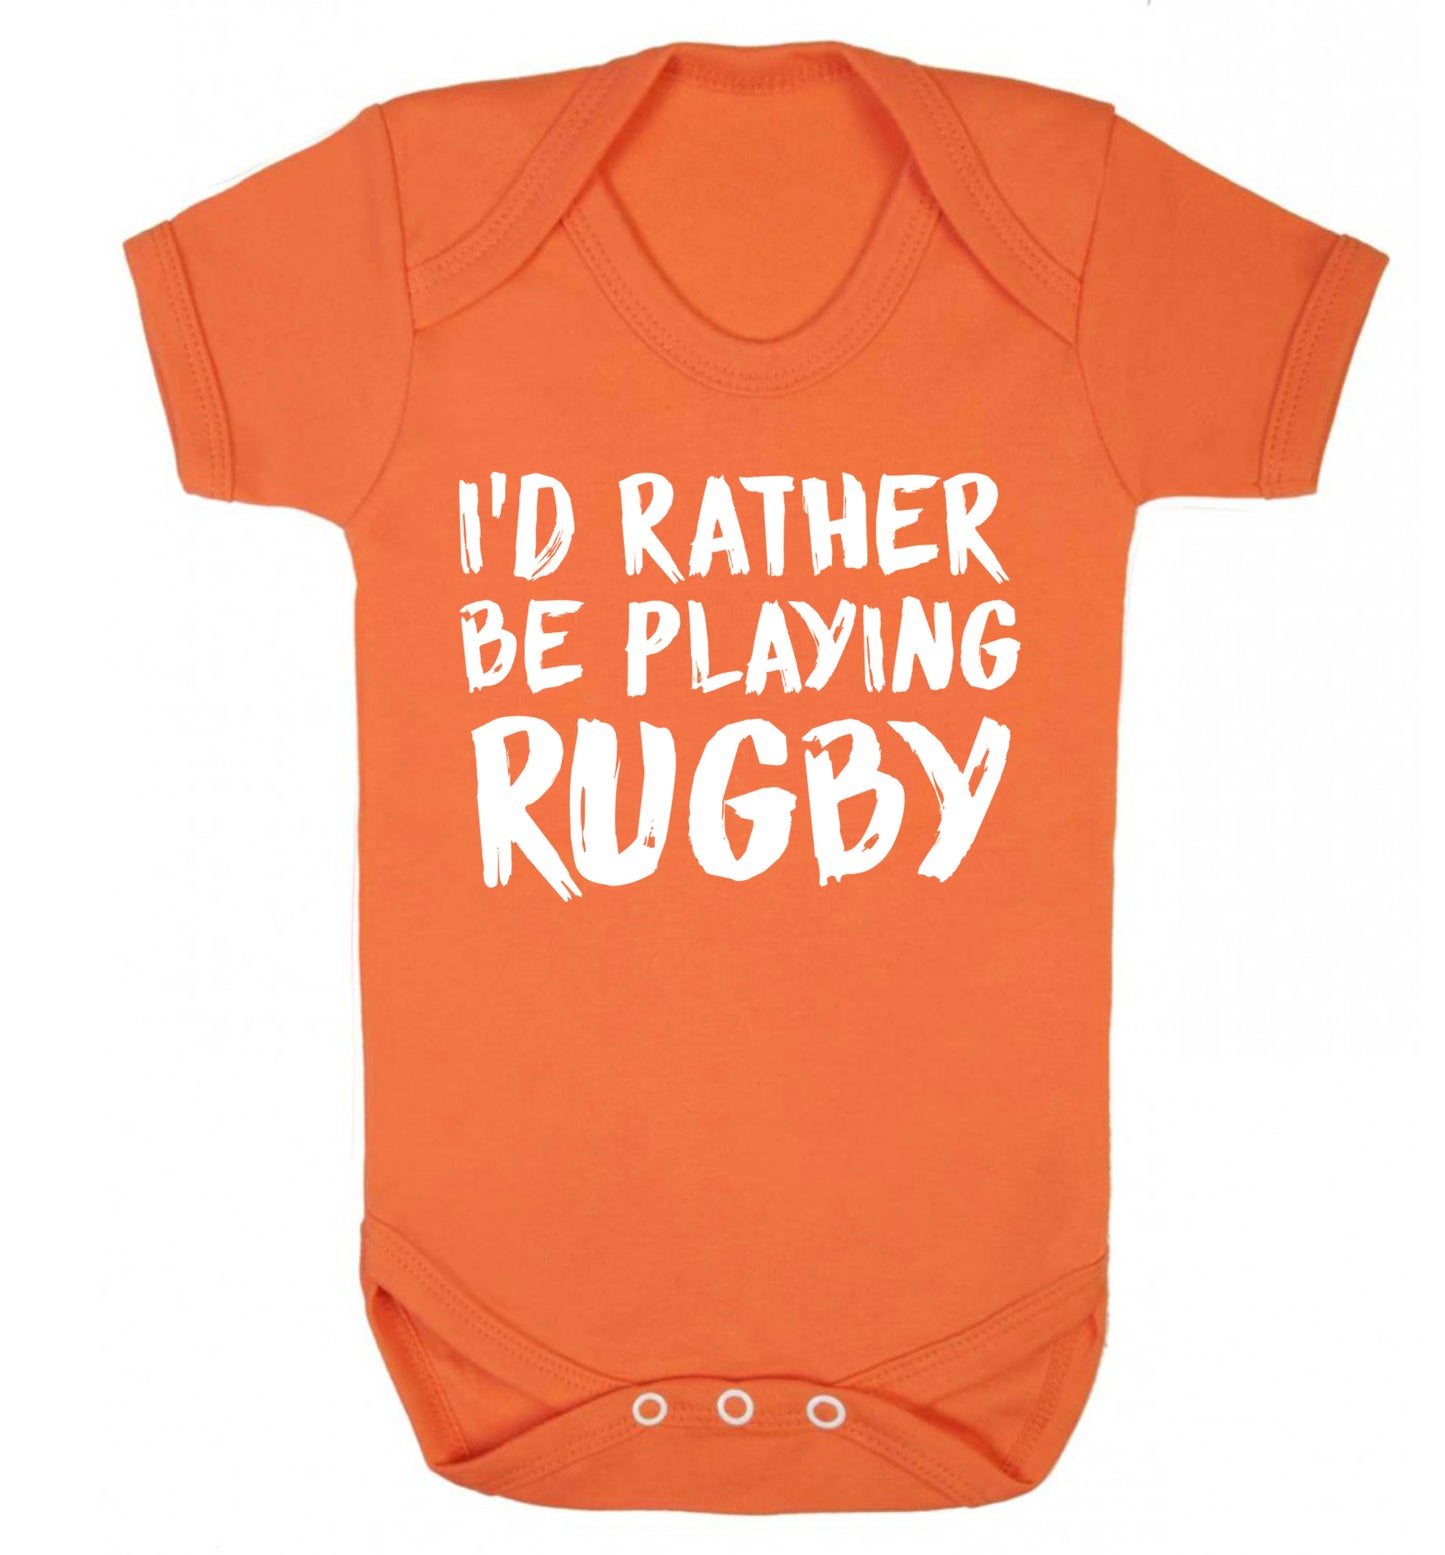 I'd rather be playing rugby Baby Vest orange 18-24 months